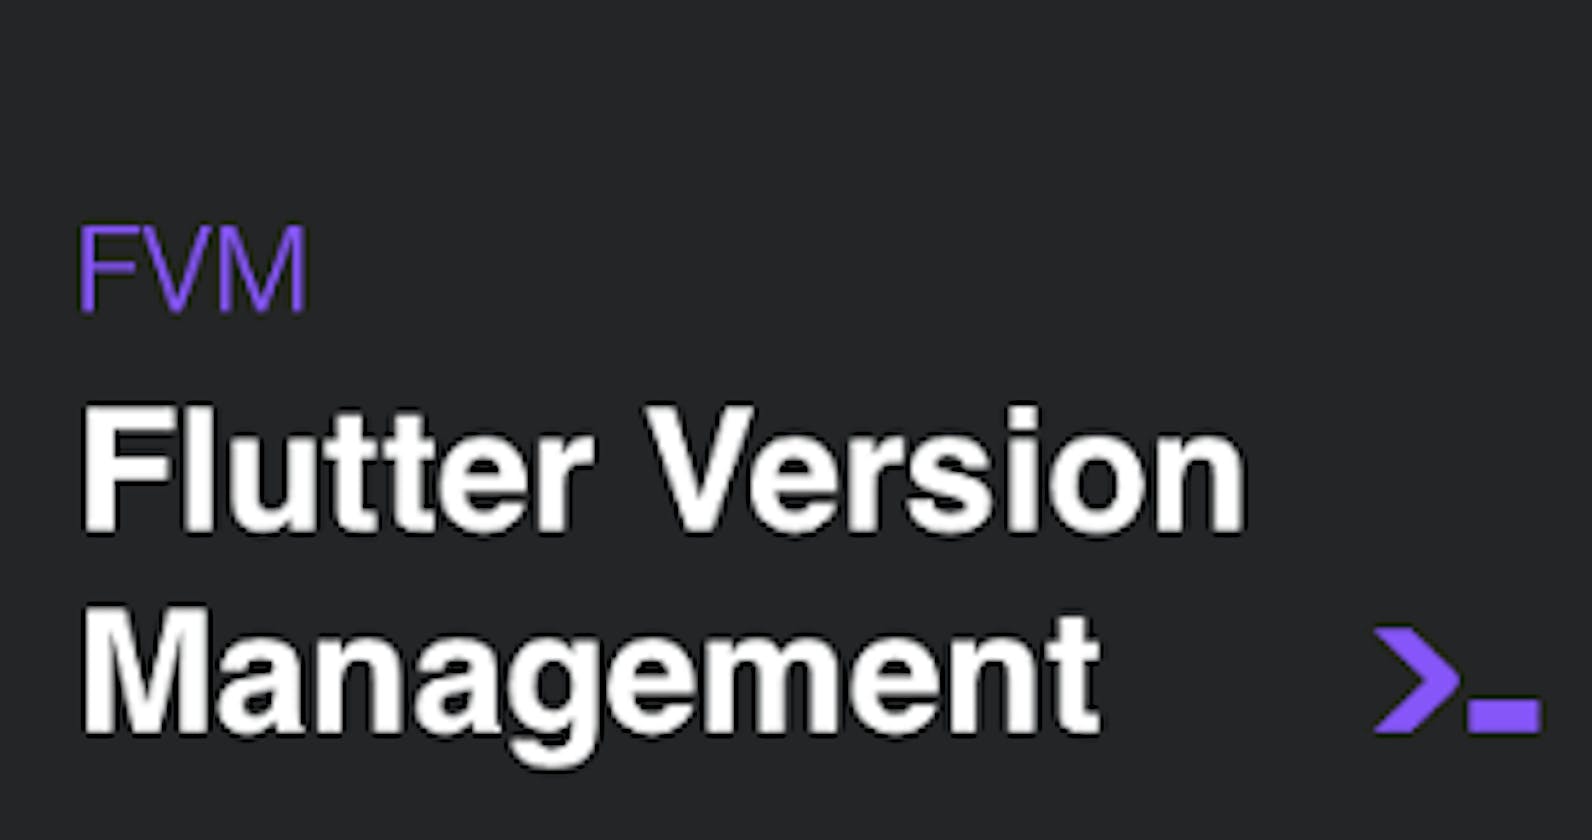 How to install FVM(Flutter Version management) on your system.